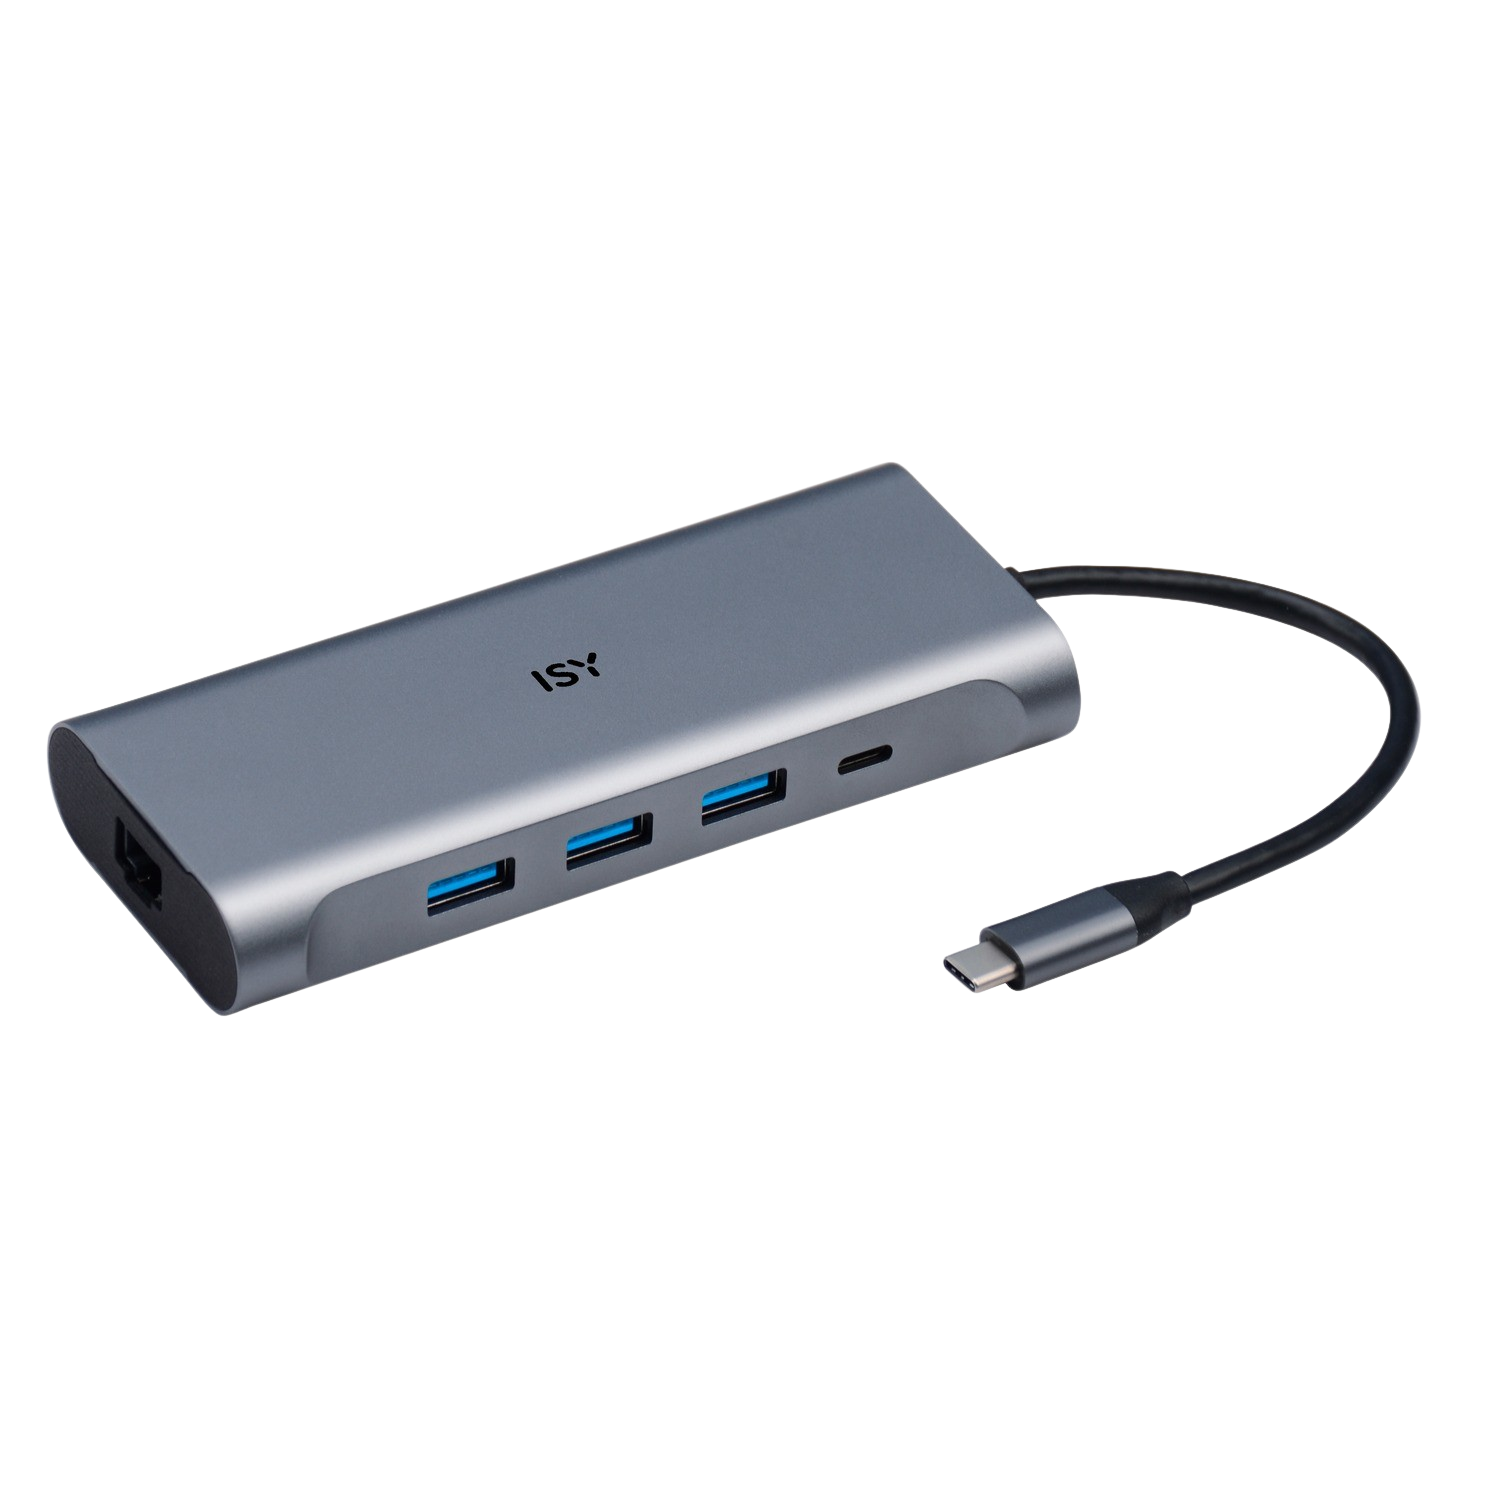 ISY Iad 1025-1 Usb-c 6-in-1 Multiport Adapter Power Delivery